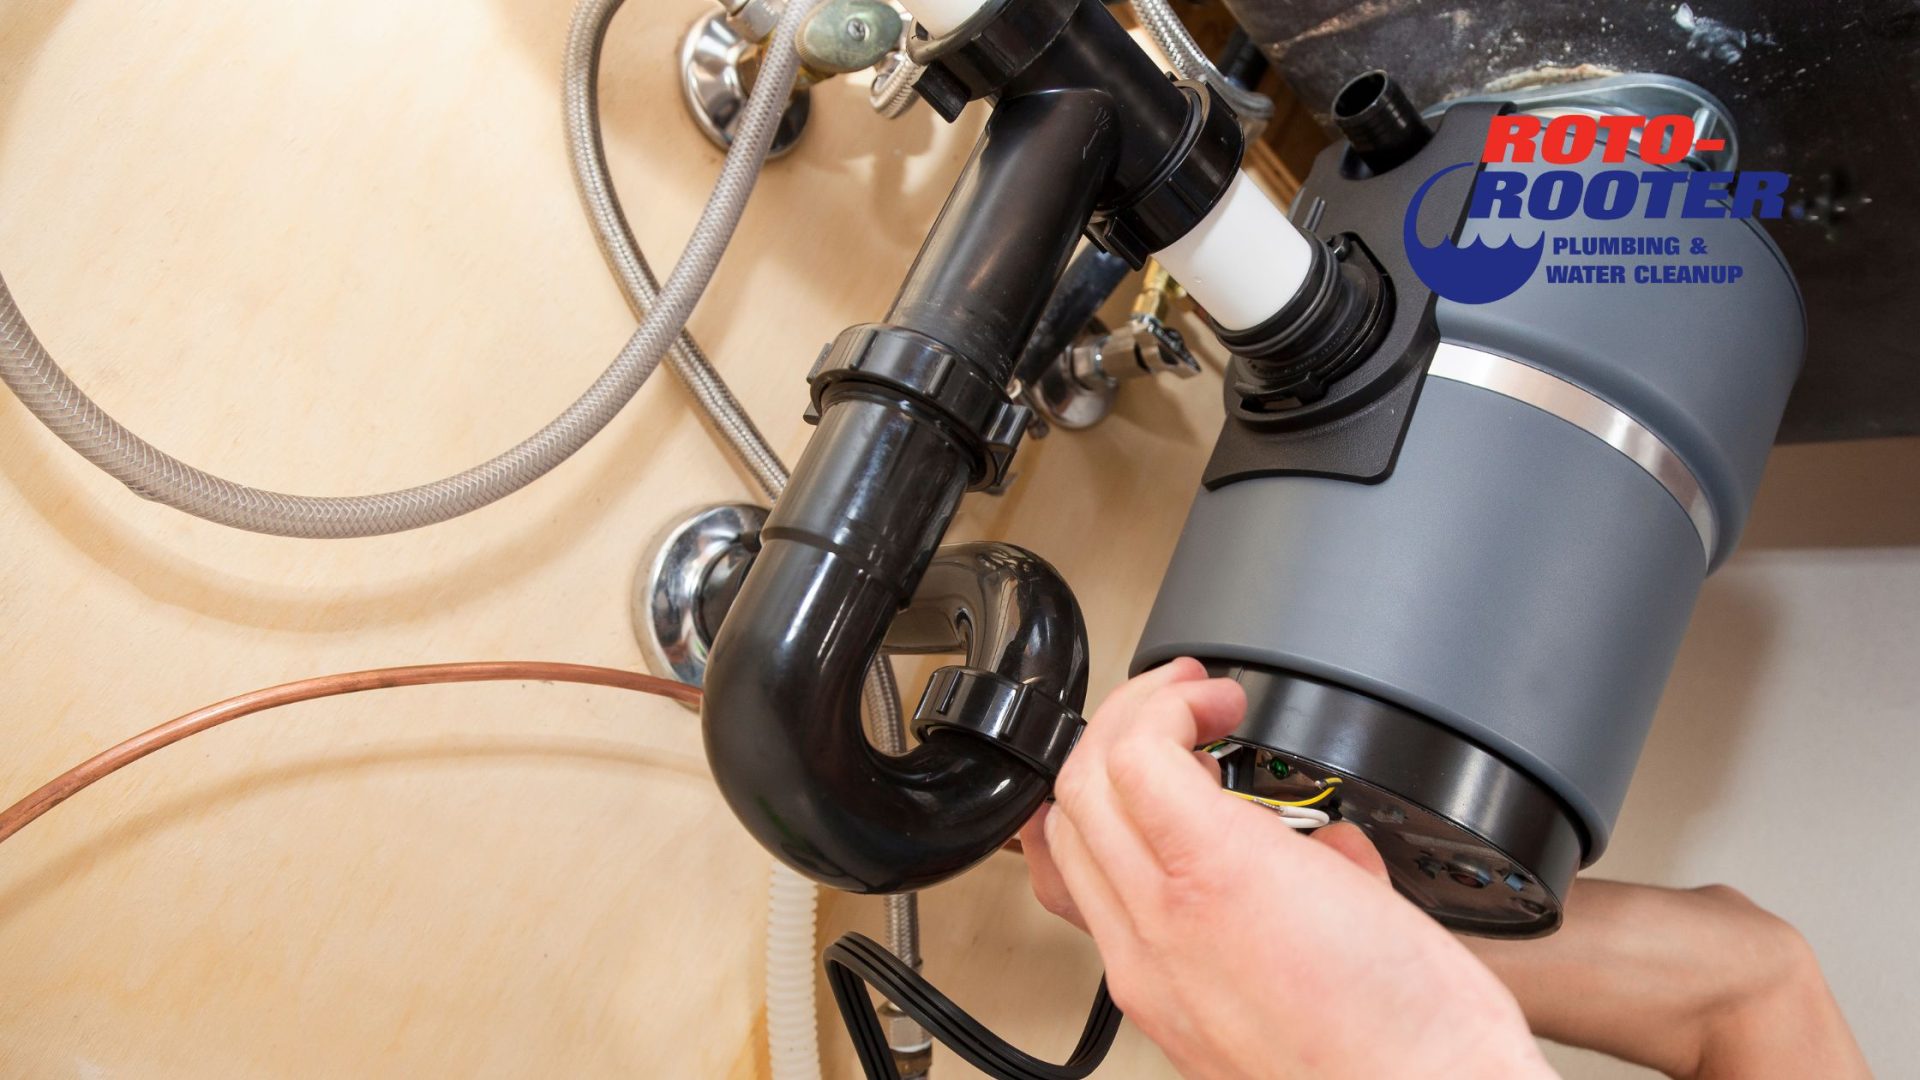 DIY Garbage Disposal: Tips and Tricks for Fixing Common Issues